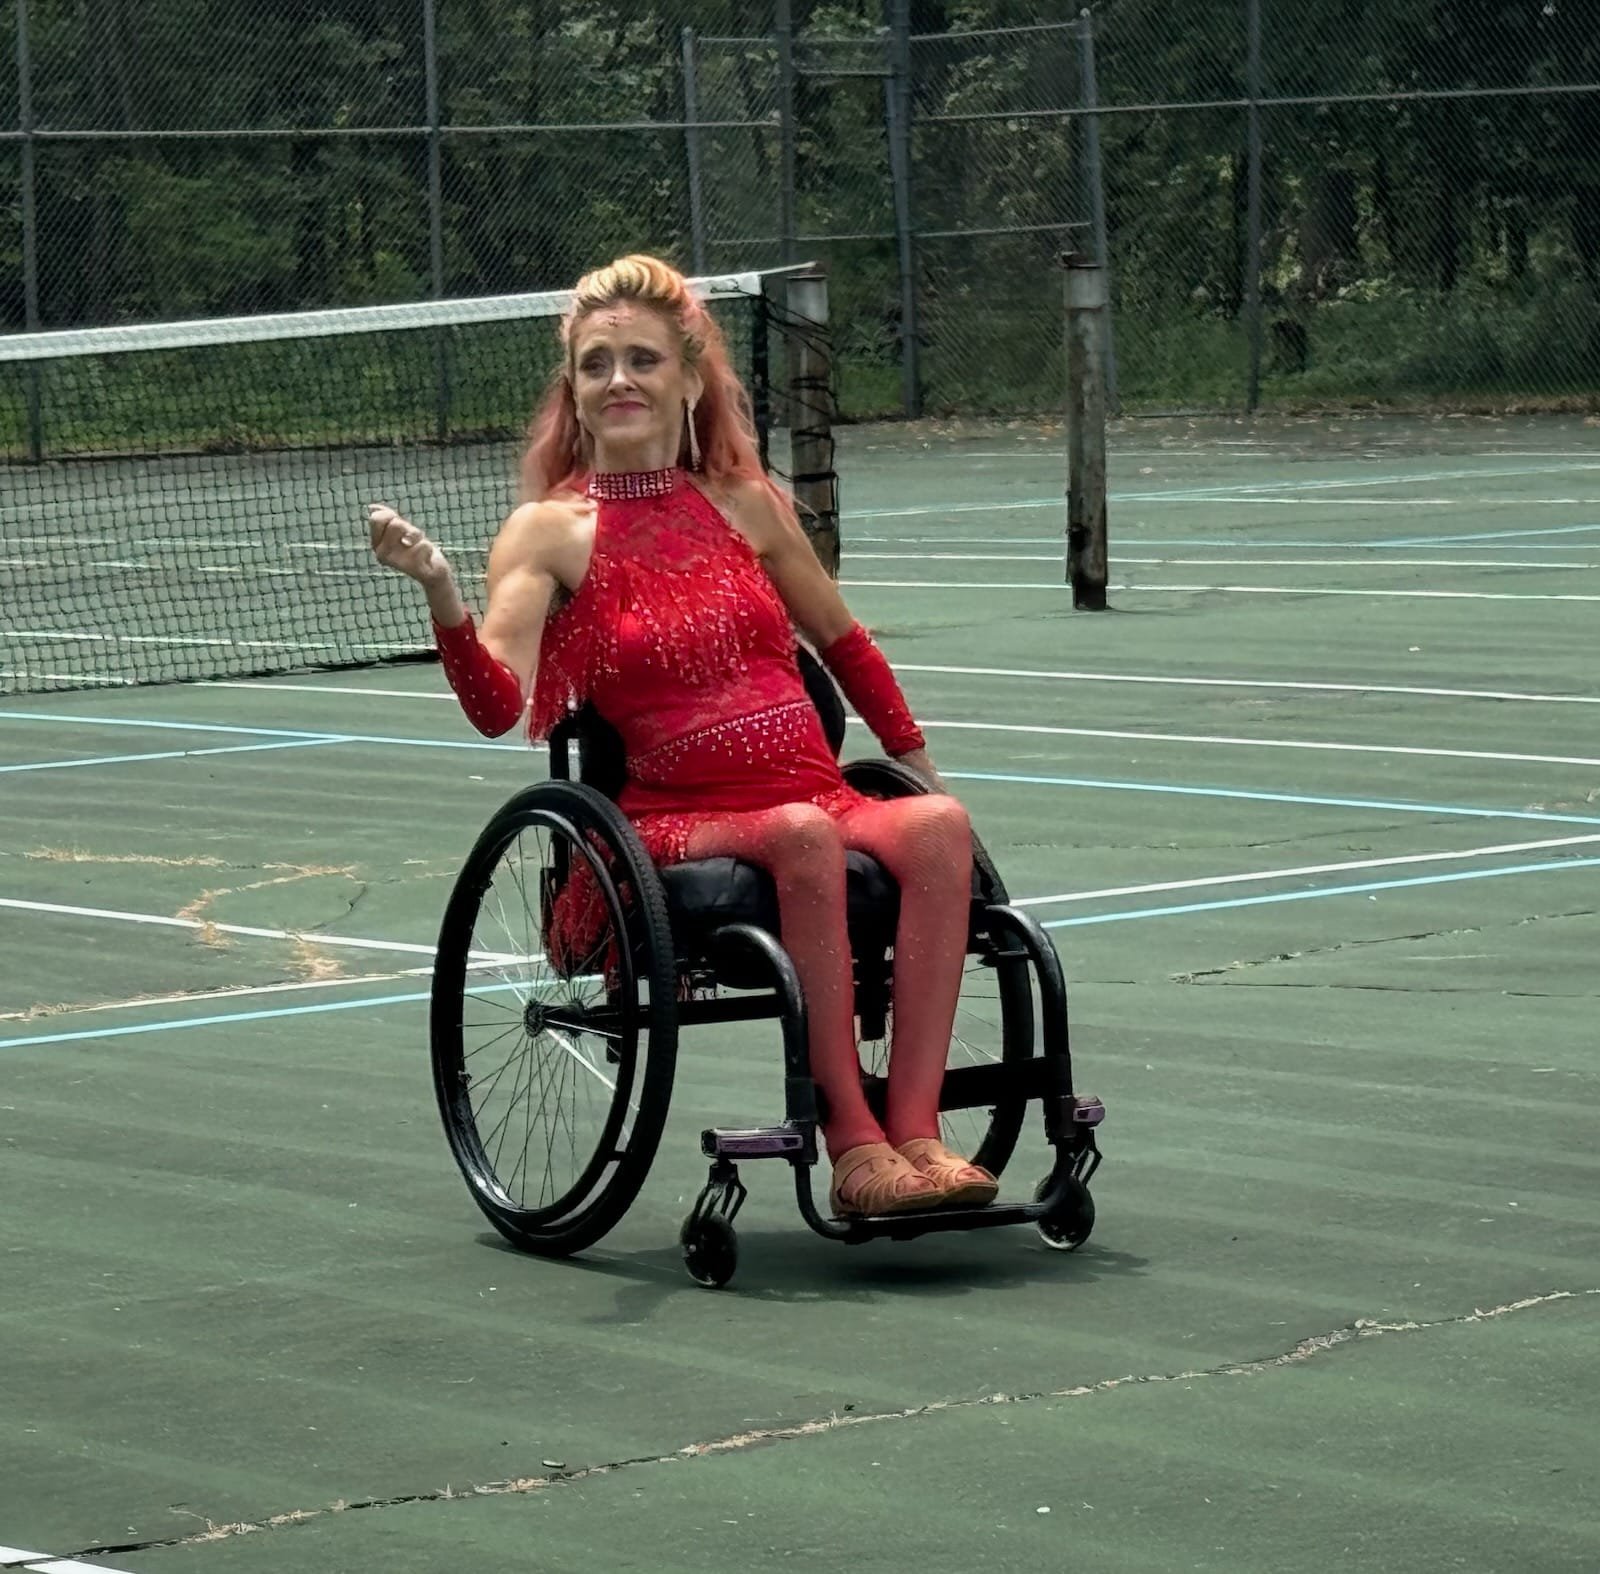 A woman in a sparkly red dress sits in a wheelchair on a tennis court